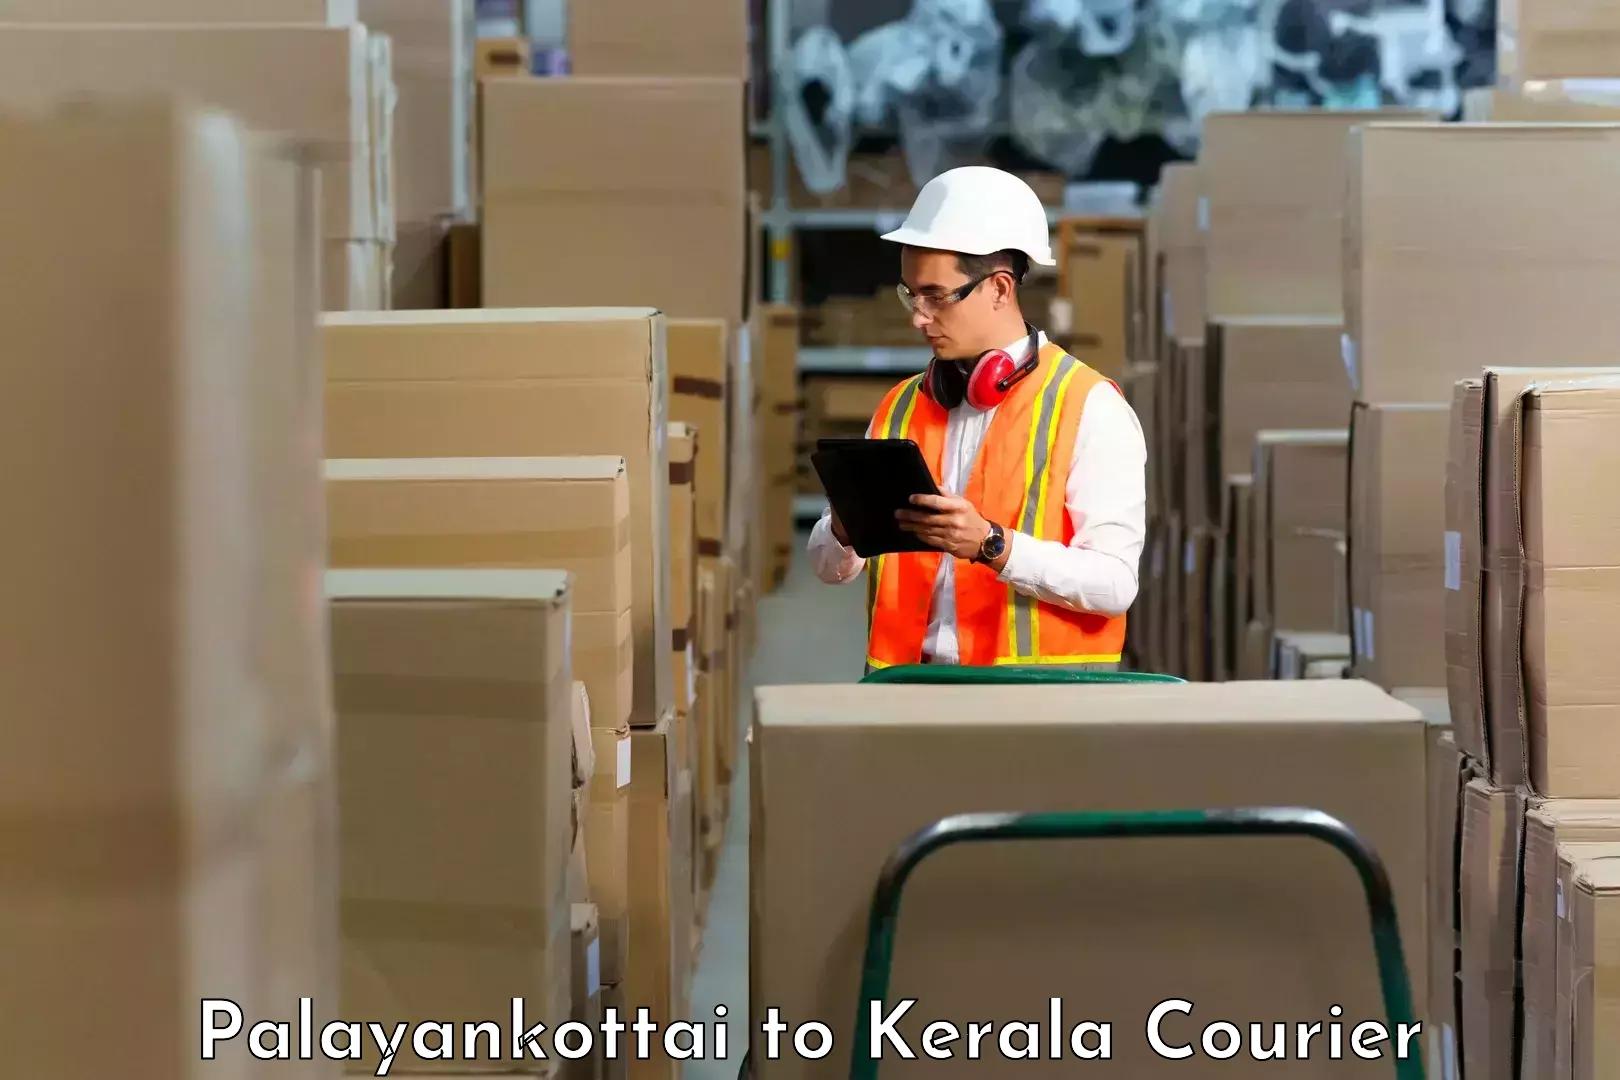 Global courier networks Palayankottai to Cochin